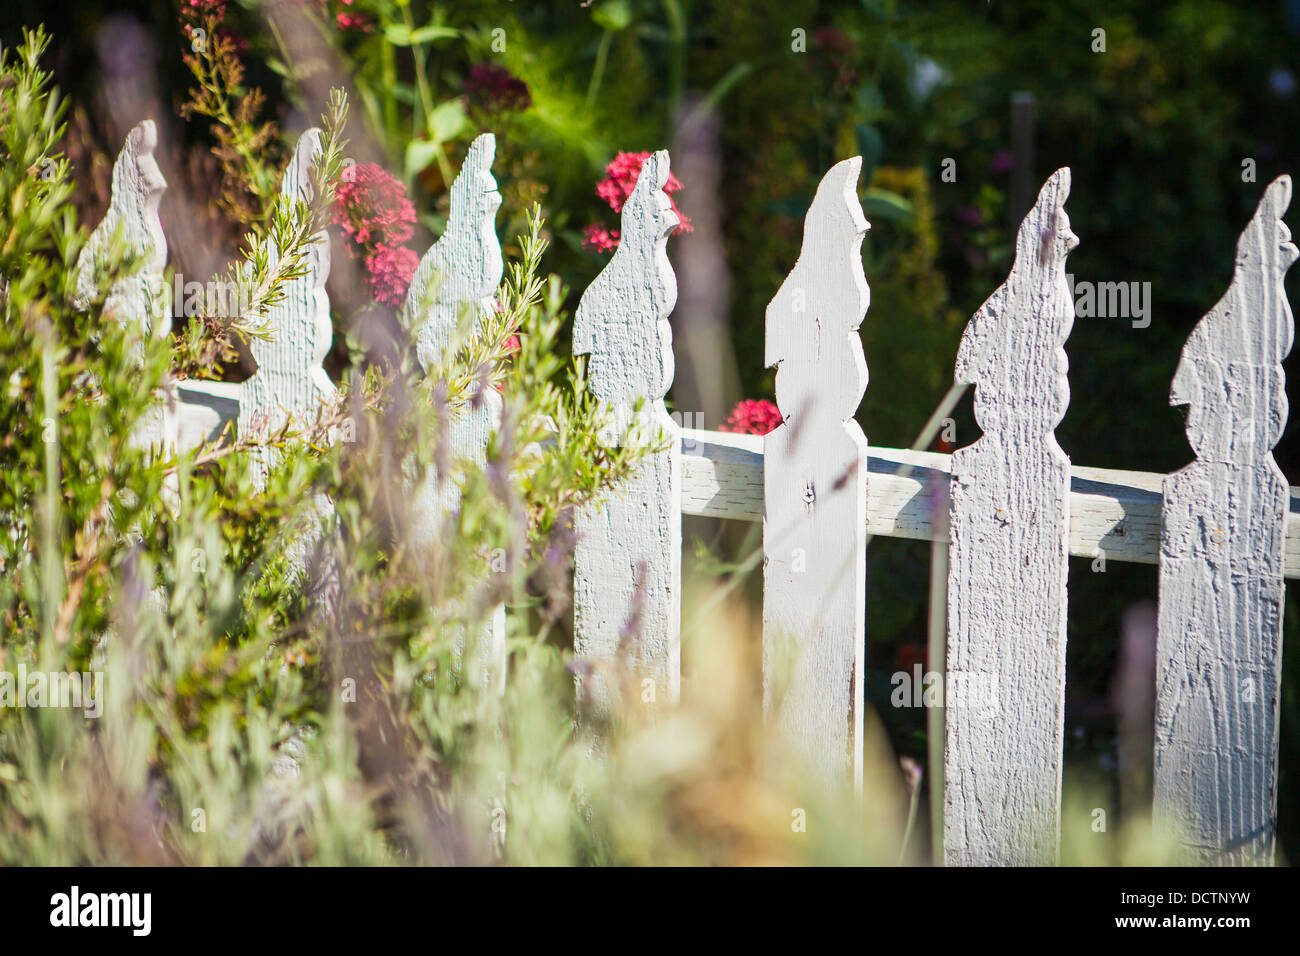 fence rails carved to resemble quails, Heart's Ease Gardens, Cambria, California, United States of America Stock Photo